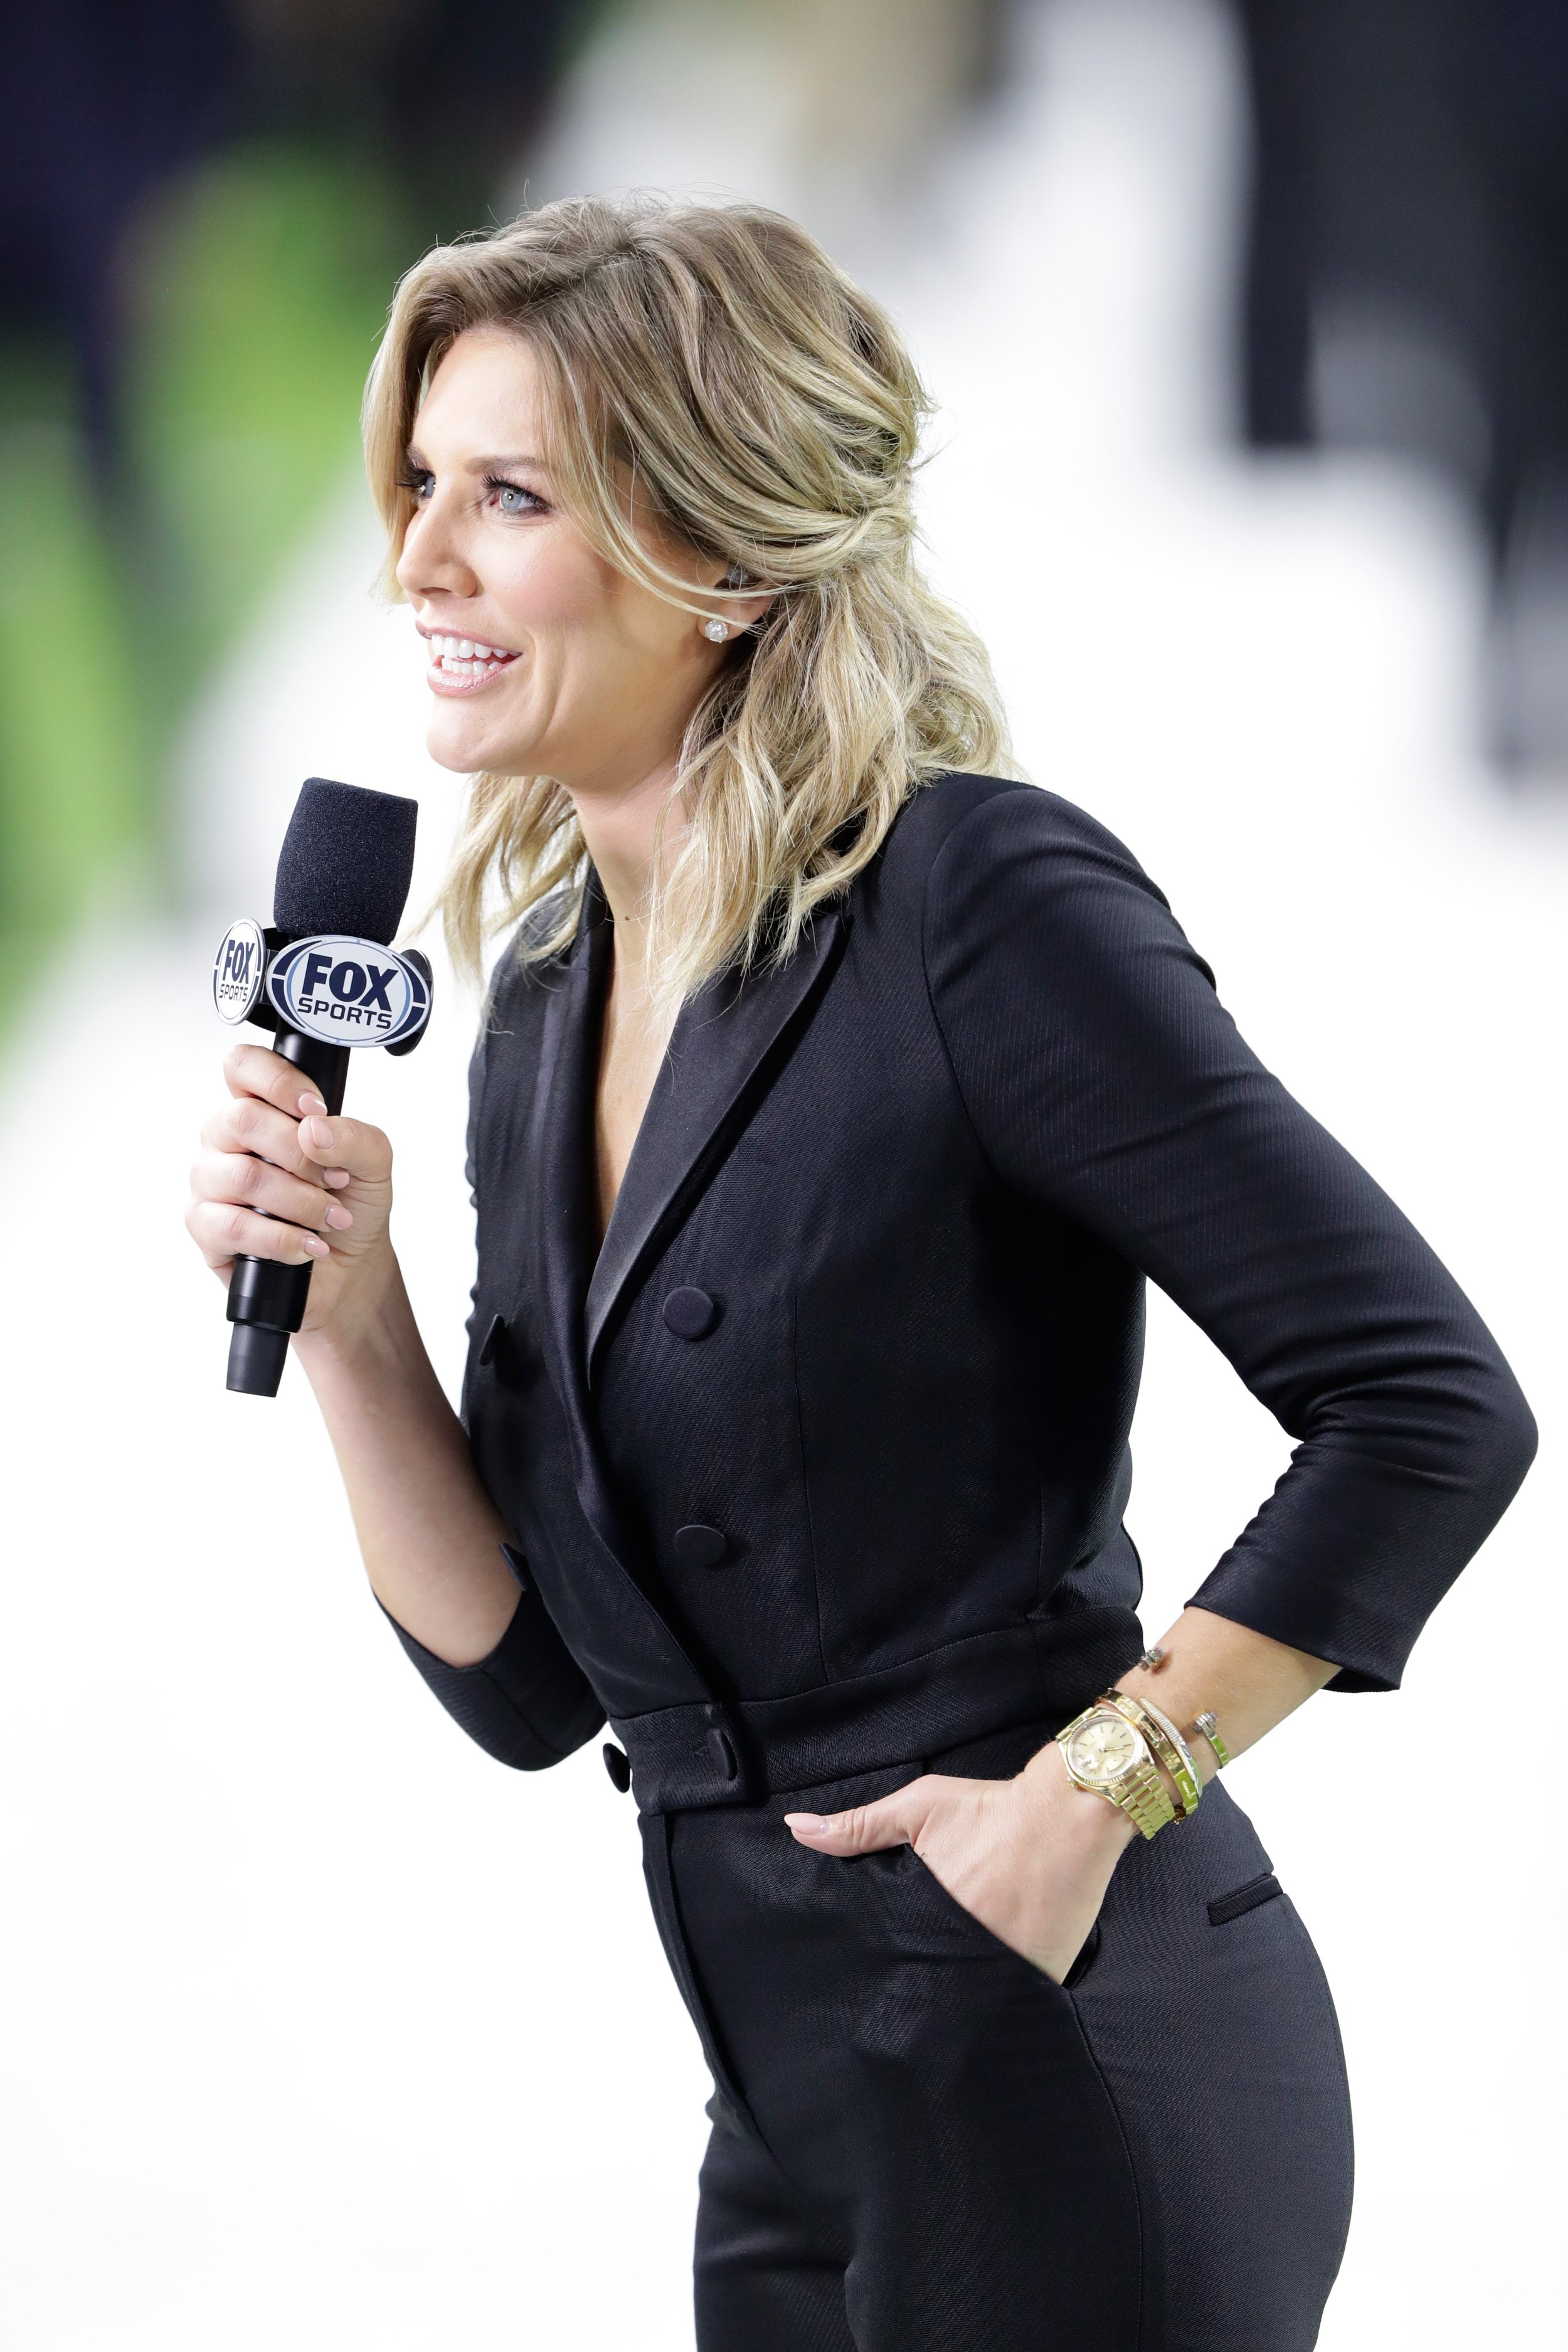 Charissa Thompson Leaked Pictures